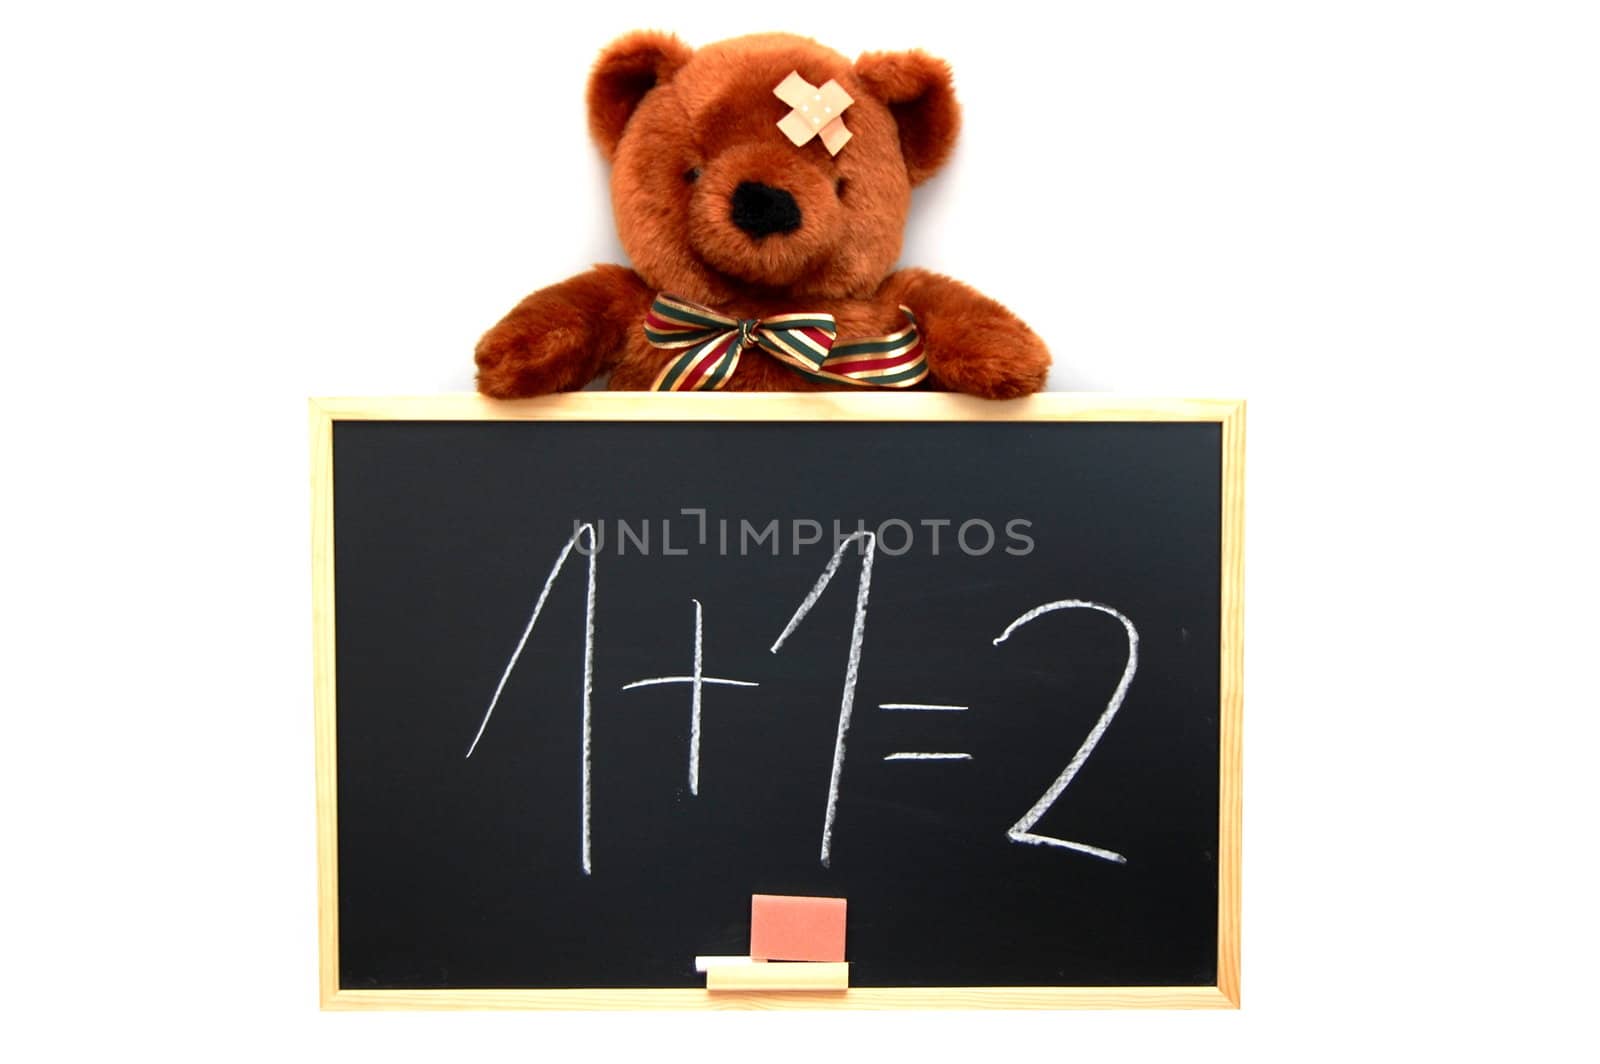 teddy with blackboard isolated on white background